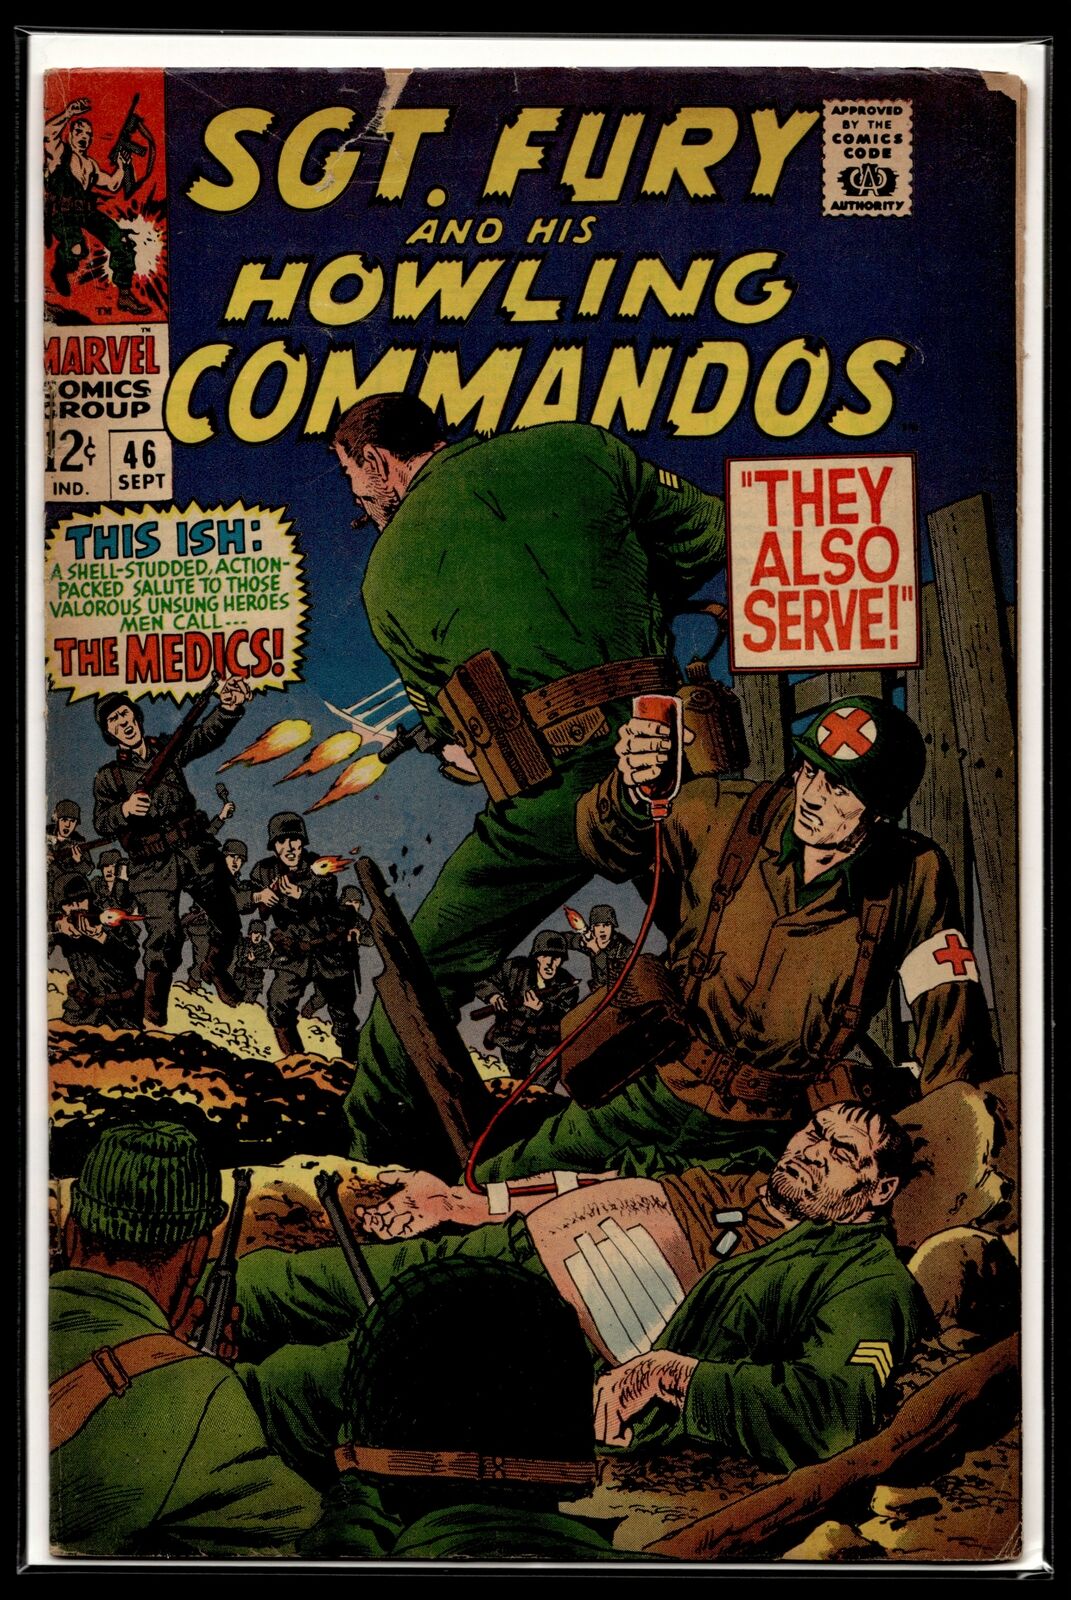 1967 Sgt. Fury and His Howling Commandos #46 Marvel Comic